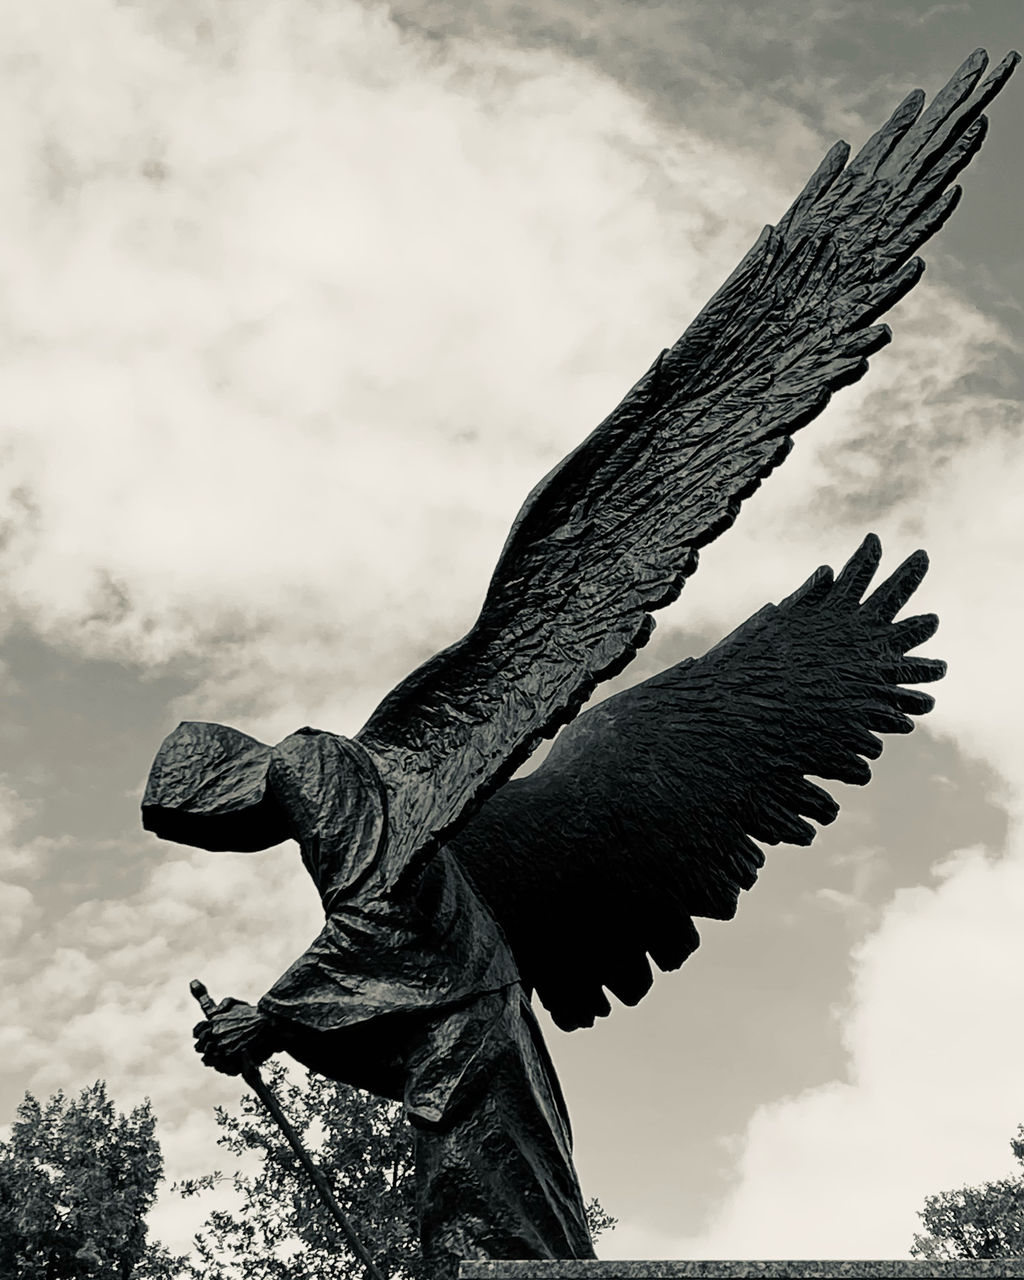 sky, eagle, bird of prey, cloud, animal, wing, statue, bird, black and white, animal themes, nature, monochrome, sculpture, animal wildlife, monochrome photography, no people, flying, representation, low angle view, history, the past, tree, animal body part, architecture, day, wildlife, outdoors, animal wing, animal representation, spread wings, one animal